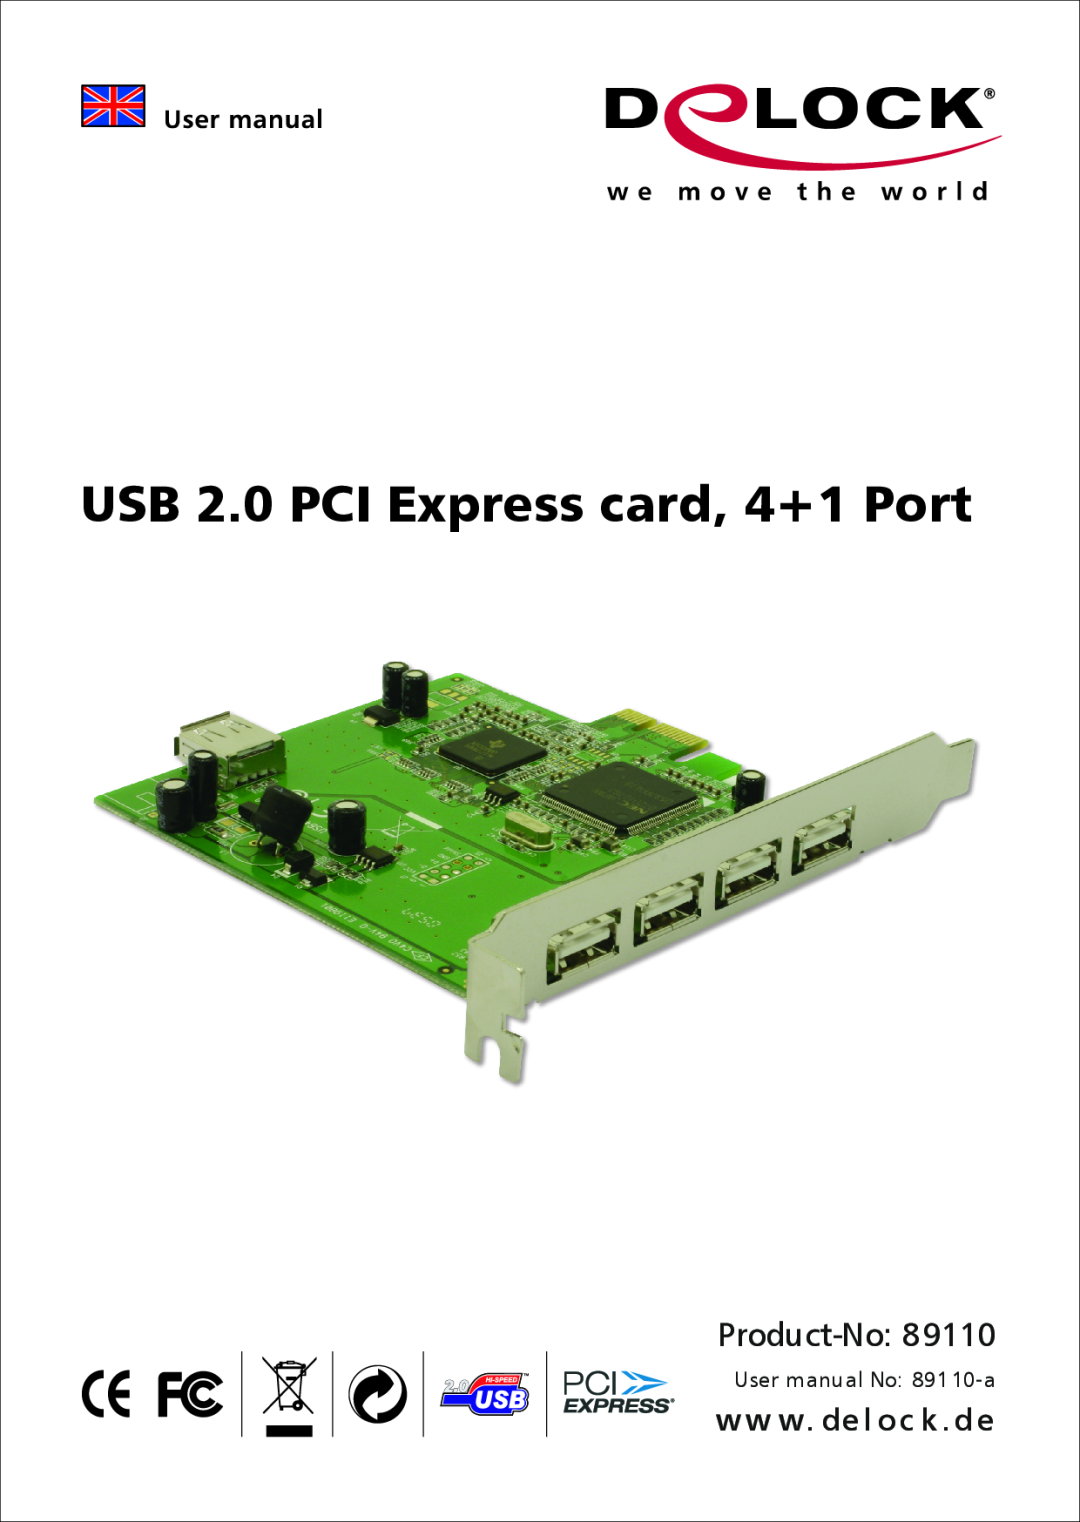 DeLOCK 89110 specifications USB 2.0 PCI Express card, 4+1 Port, Product-No, ww w. de l oc k .d e, User manual No 891 10-a 